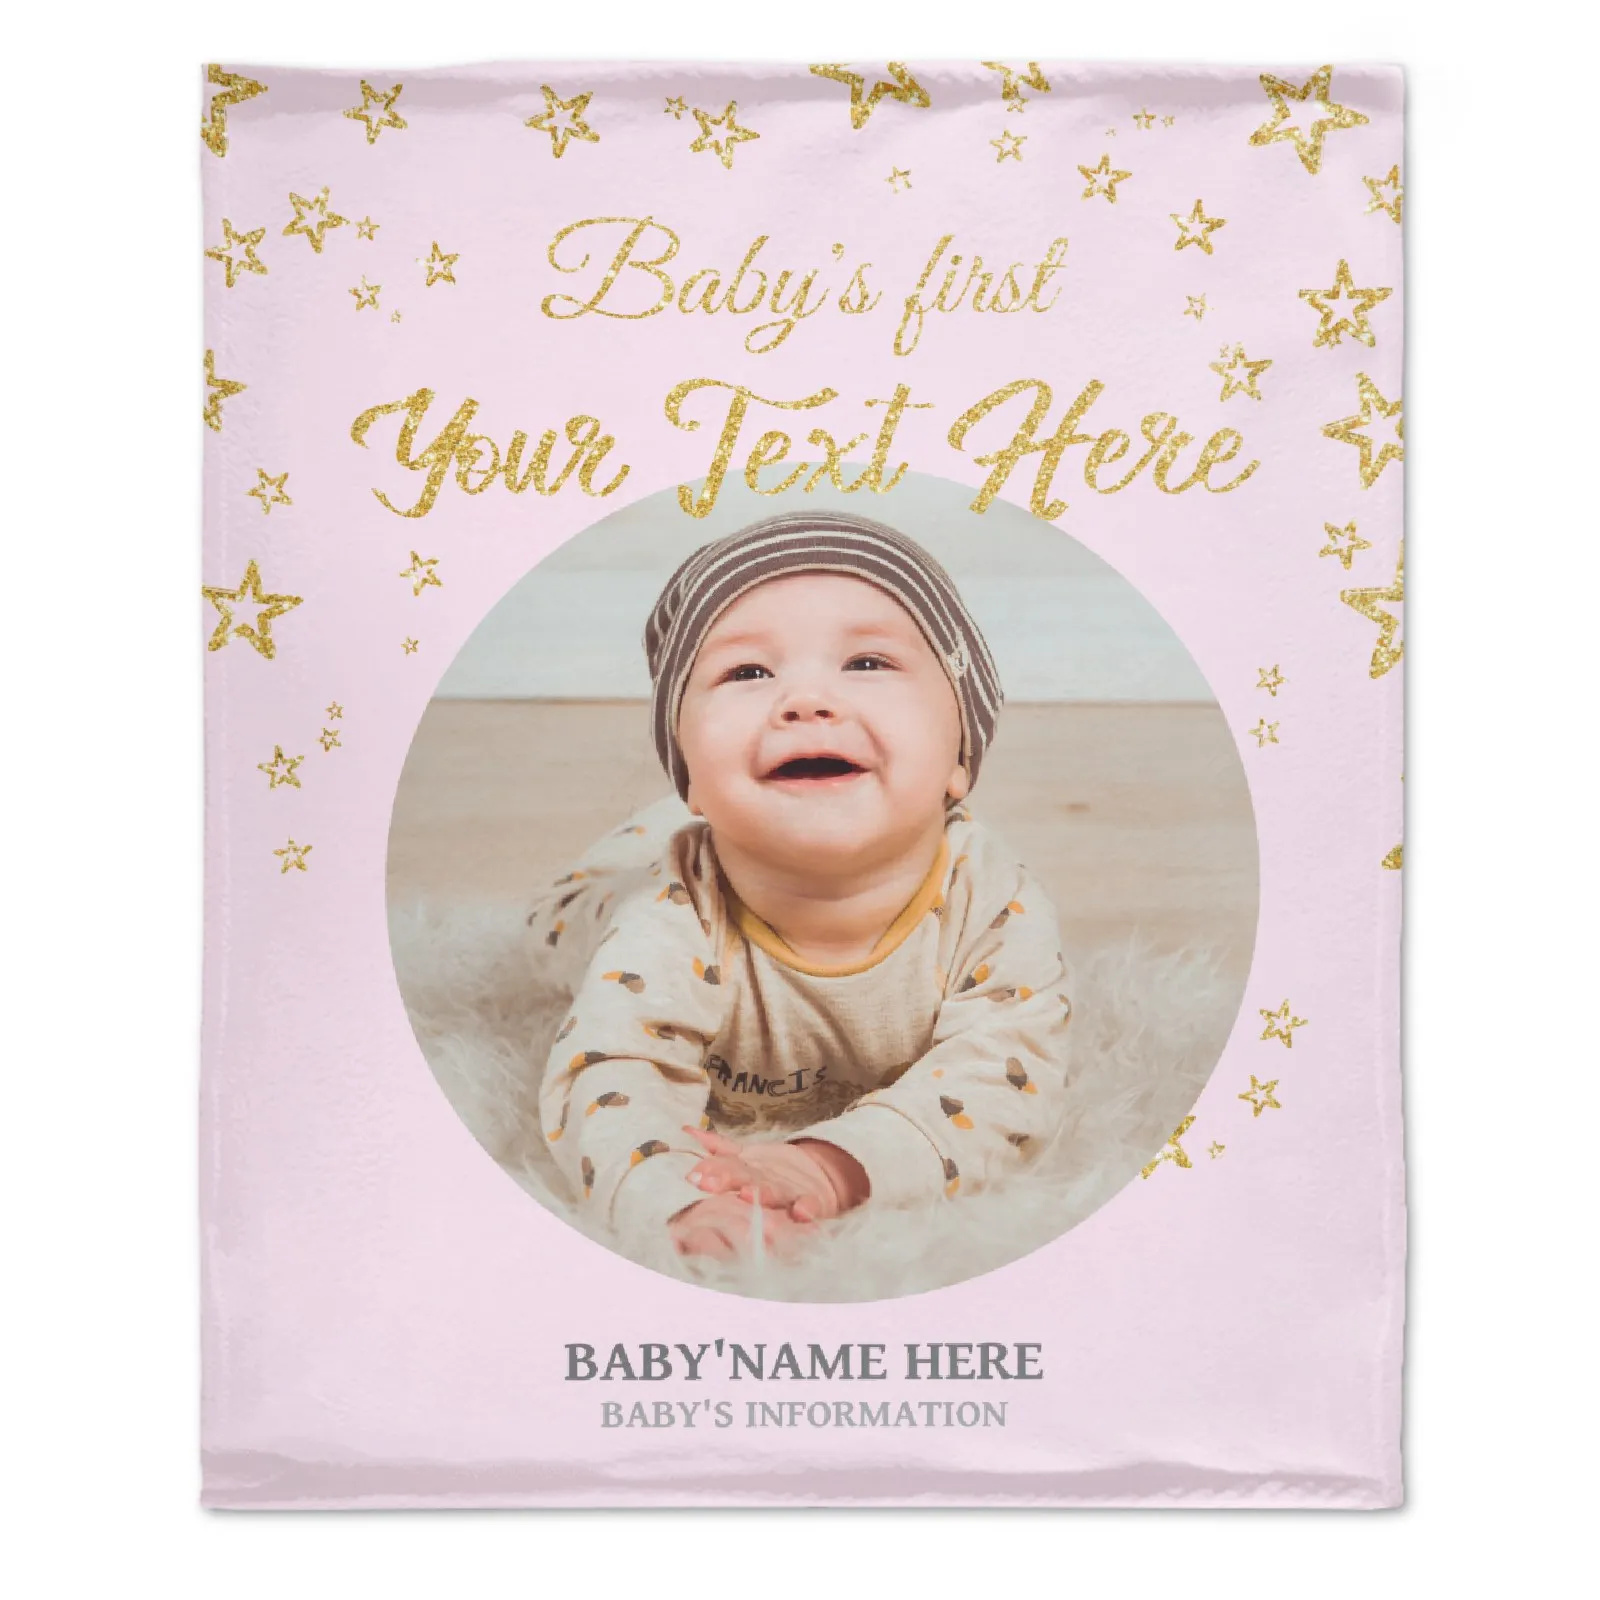 

Custom Baby Blanket Customized Gifts with Baby Name Blankets Add Picture Text Super Soft Cozy Throw Blanket Cover 40x50inch